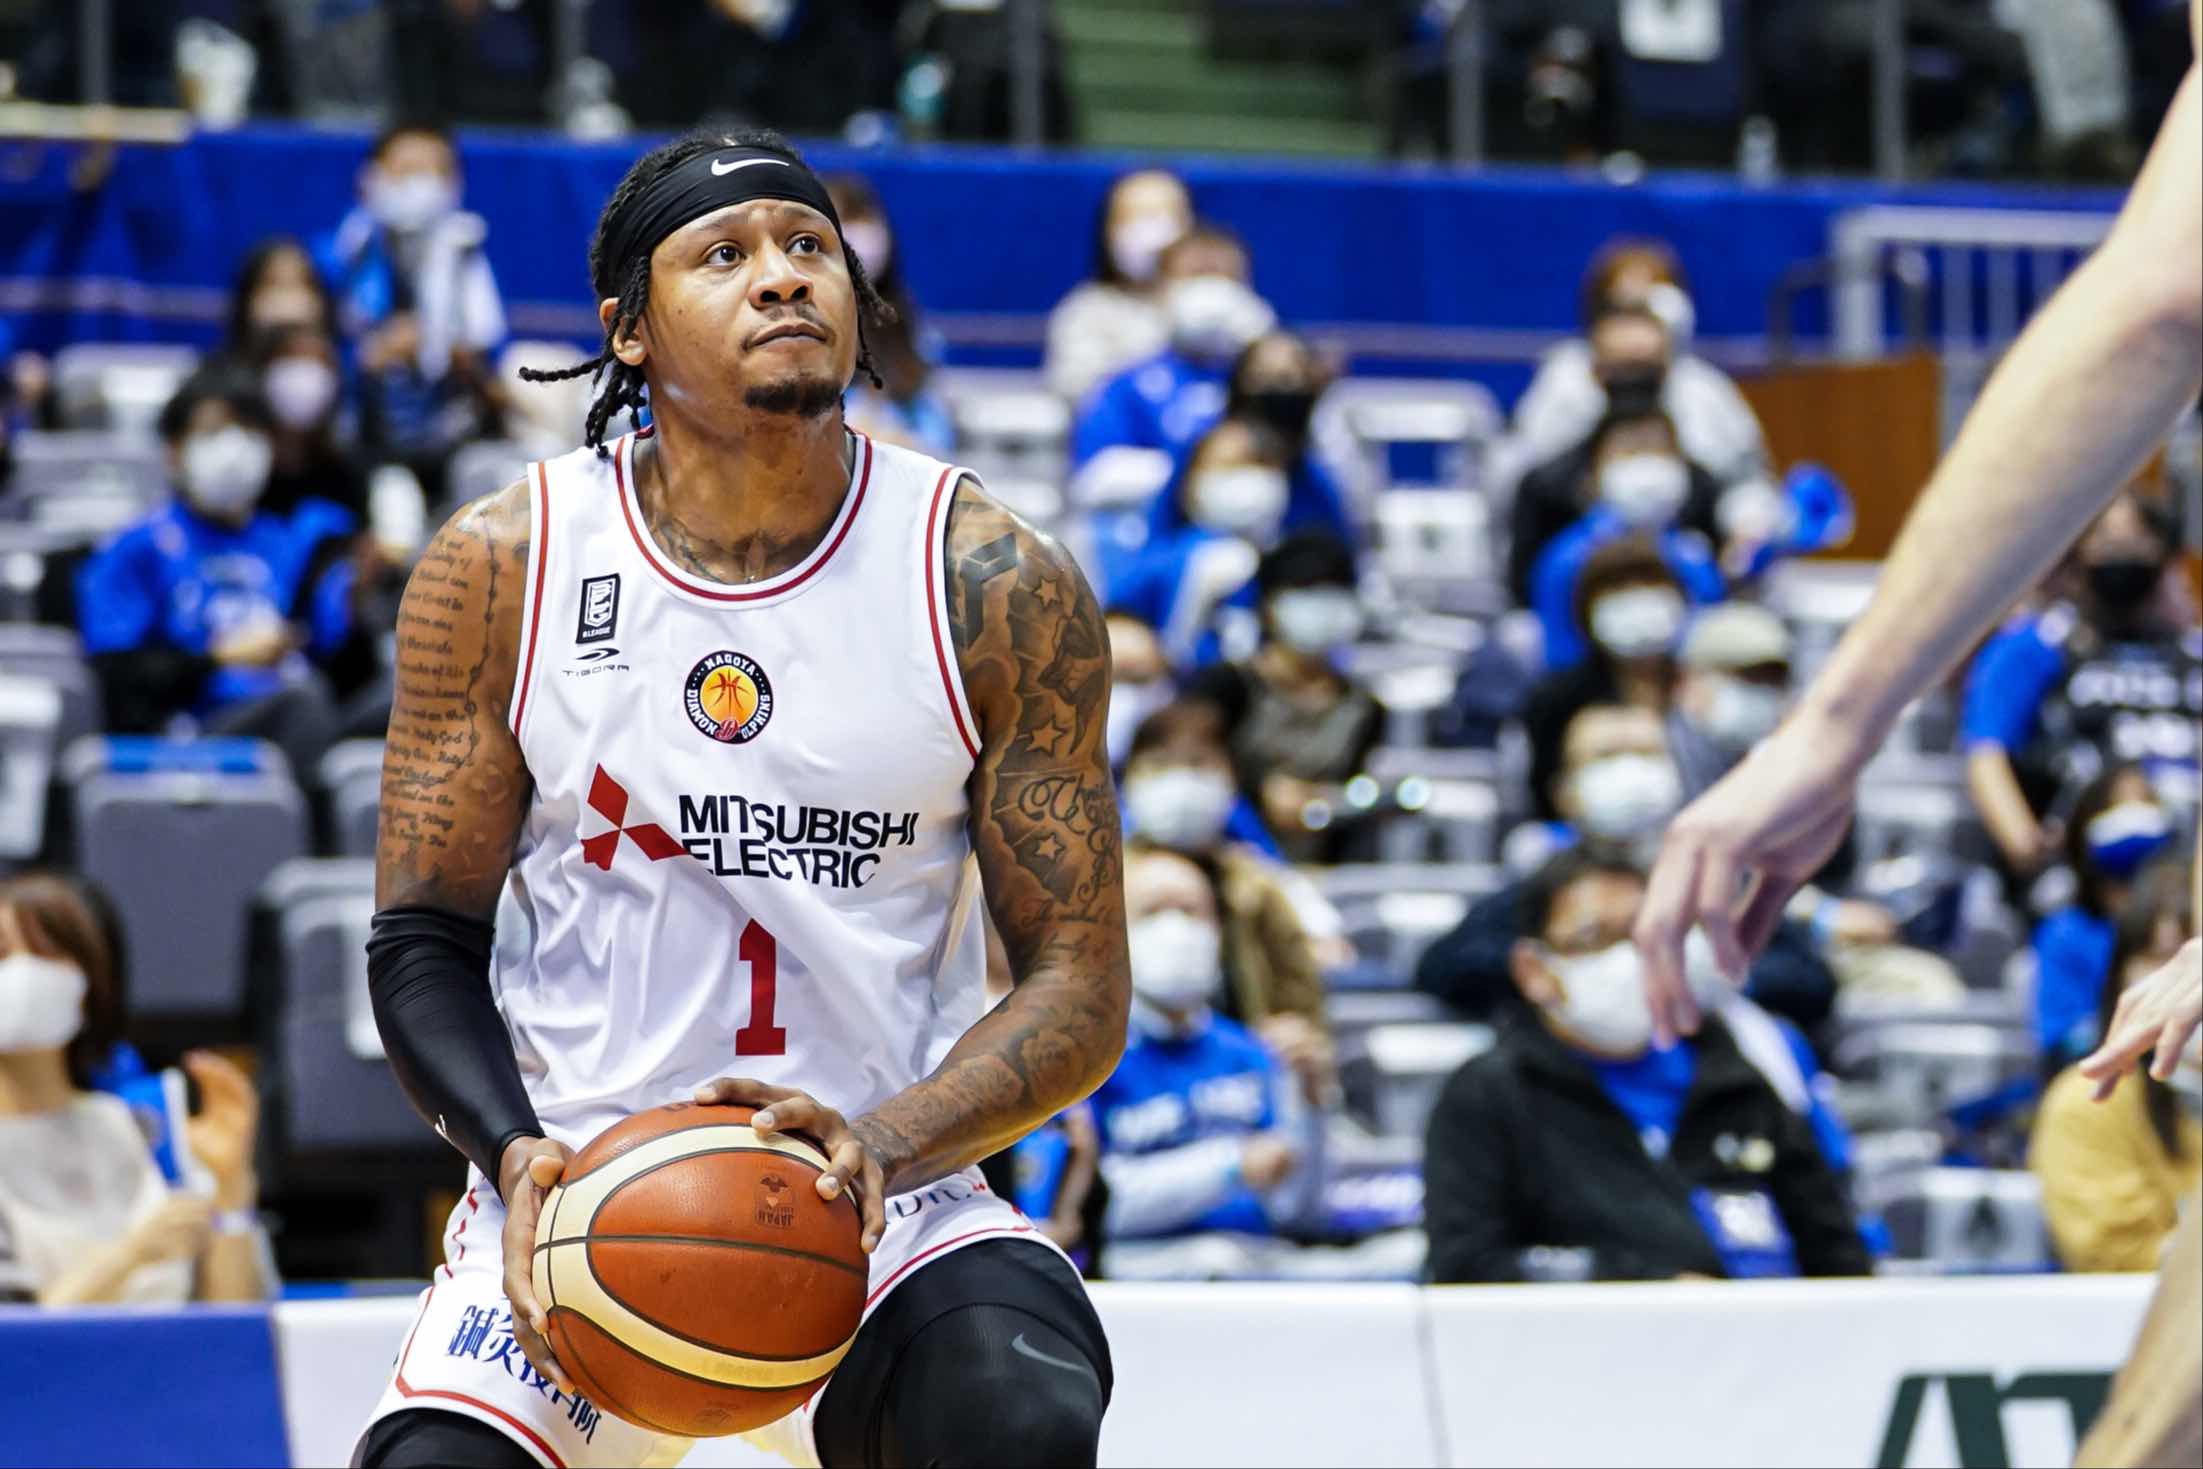 2021-22-B.League-Season-Nagoya-vs-Mikawa-Ray-Parks-1 Ramos faces Schafer in B.League; Sotto looks to step up for Humphries in NBL Basketball News  - philippine sports news